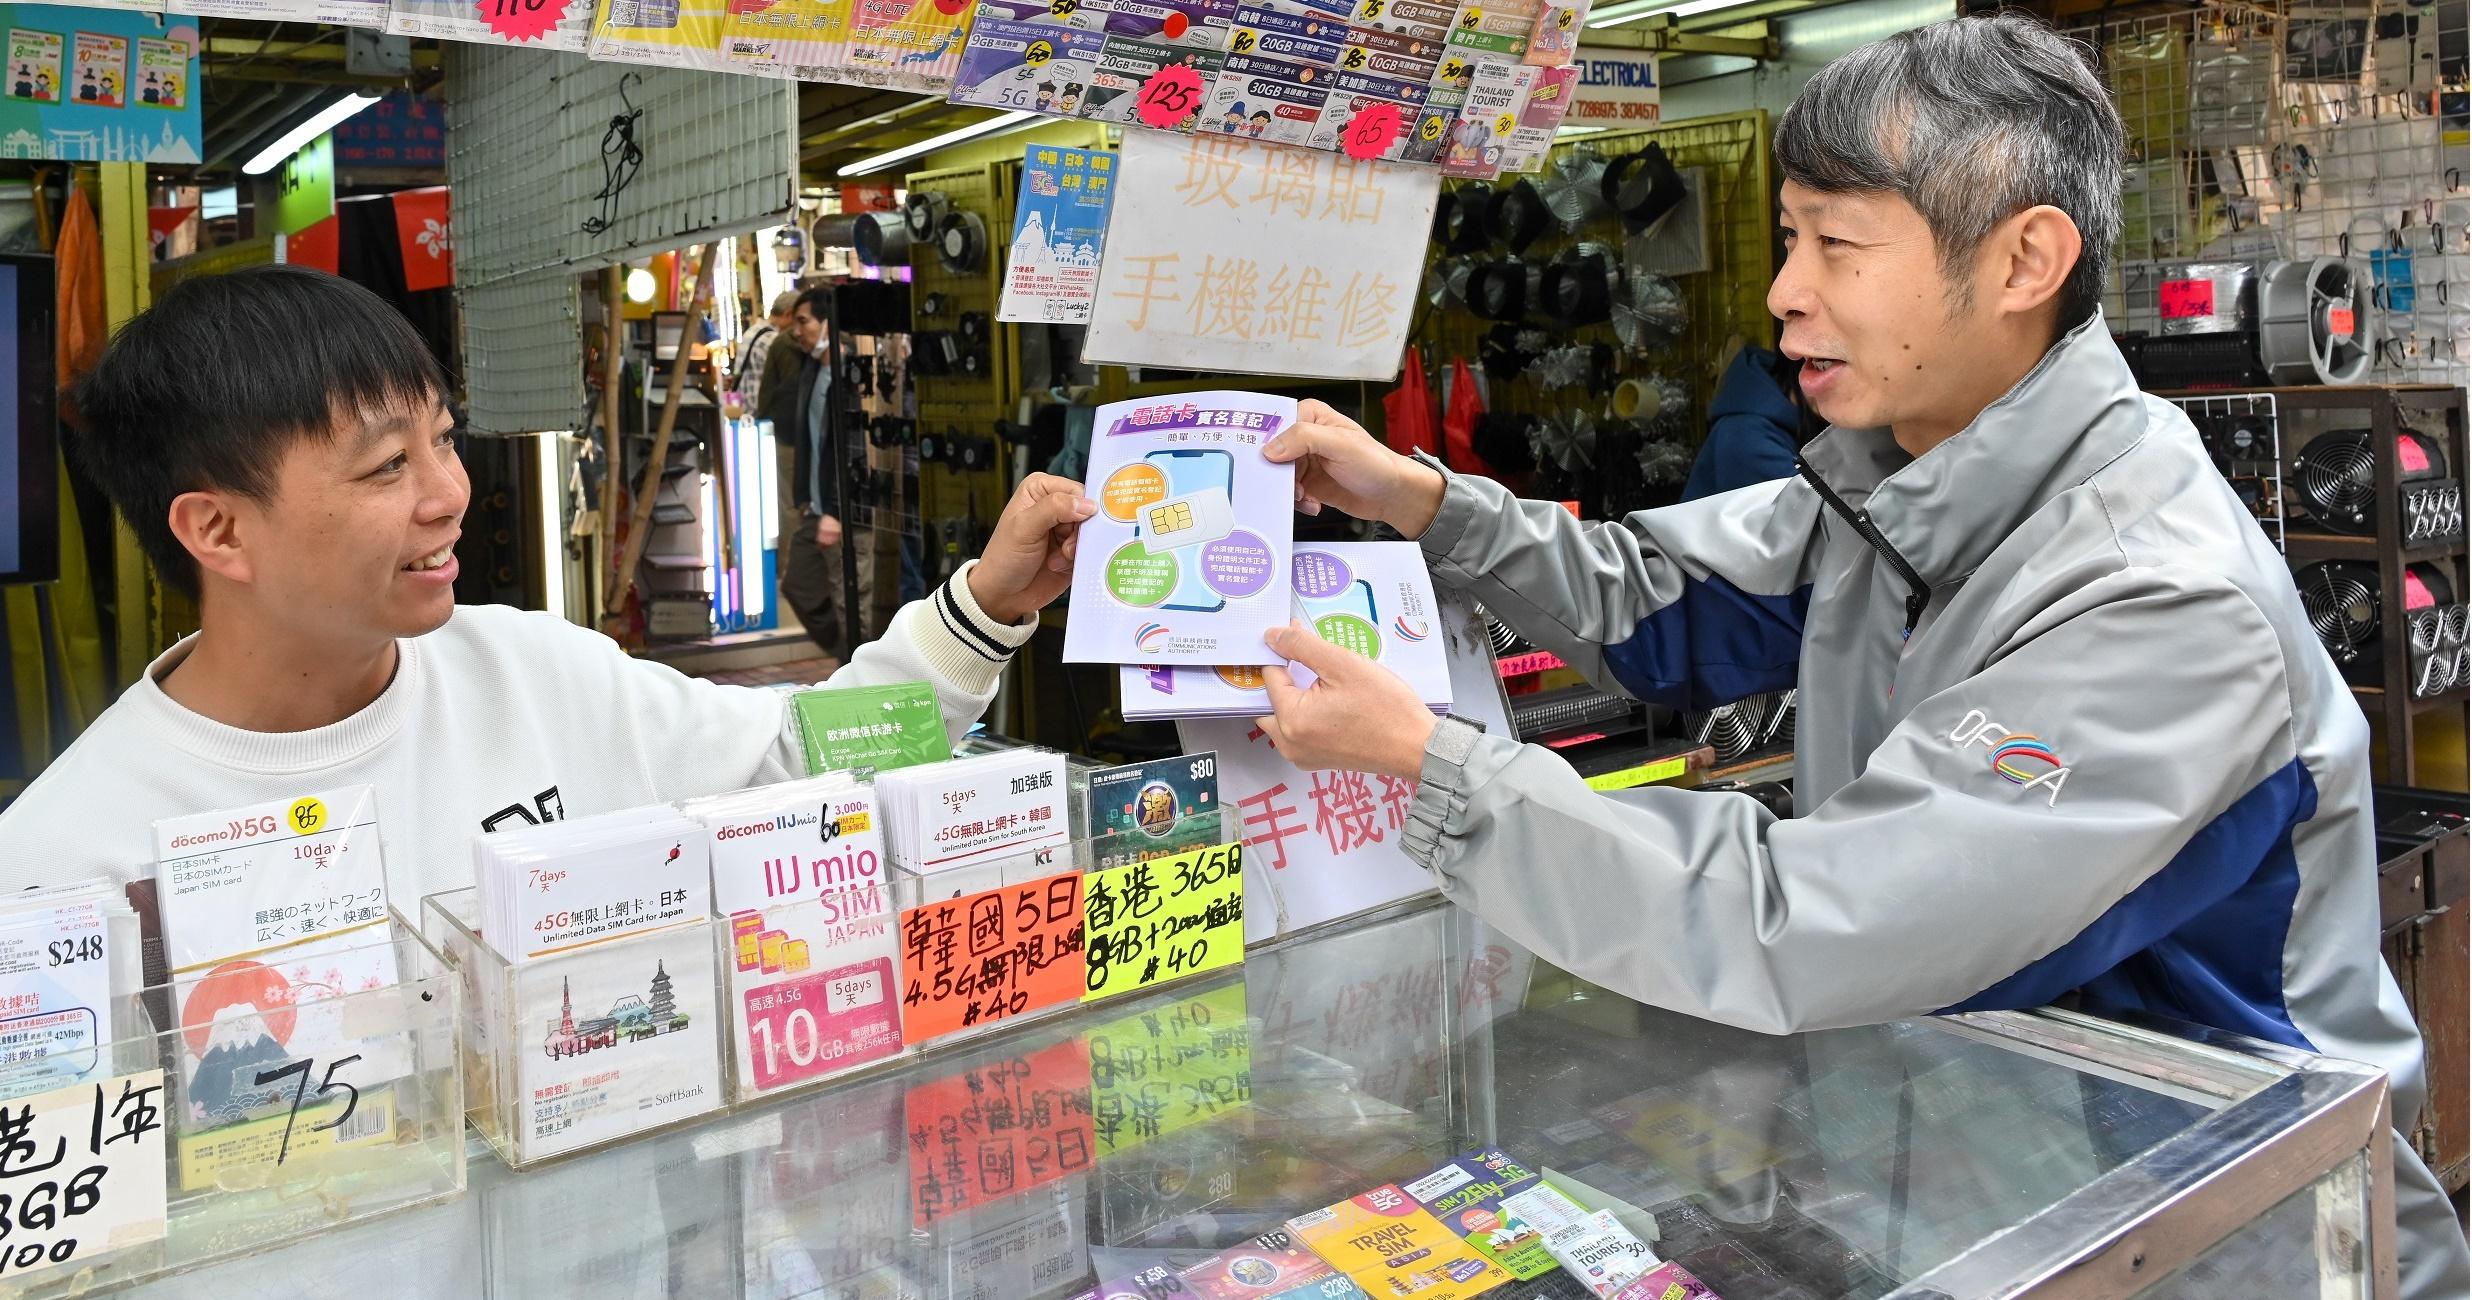 The Office of the Communications Authority (OFCA) conducted today (February 6) market surveillance, publicity and education activities around Apliu Street in Sham Shui Po on real-name registration for SIM cards before the Lunar New Year. Photo shows an OFCA staff member (right) distributing pamphlets to remind a trader not to assist any persons in using the identity document of any third party in completing real-name registration, and not to sell pre-paid SIM cards allegedly having completed registration.